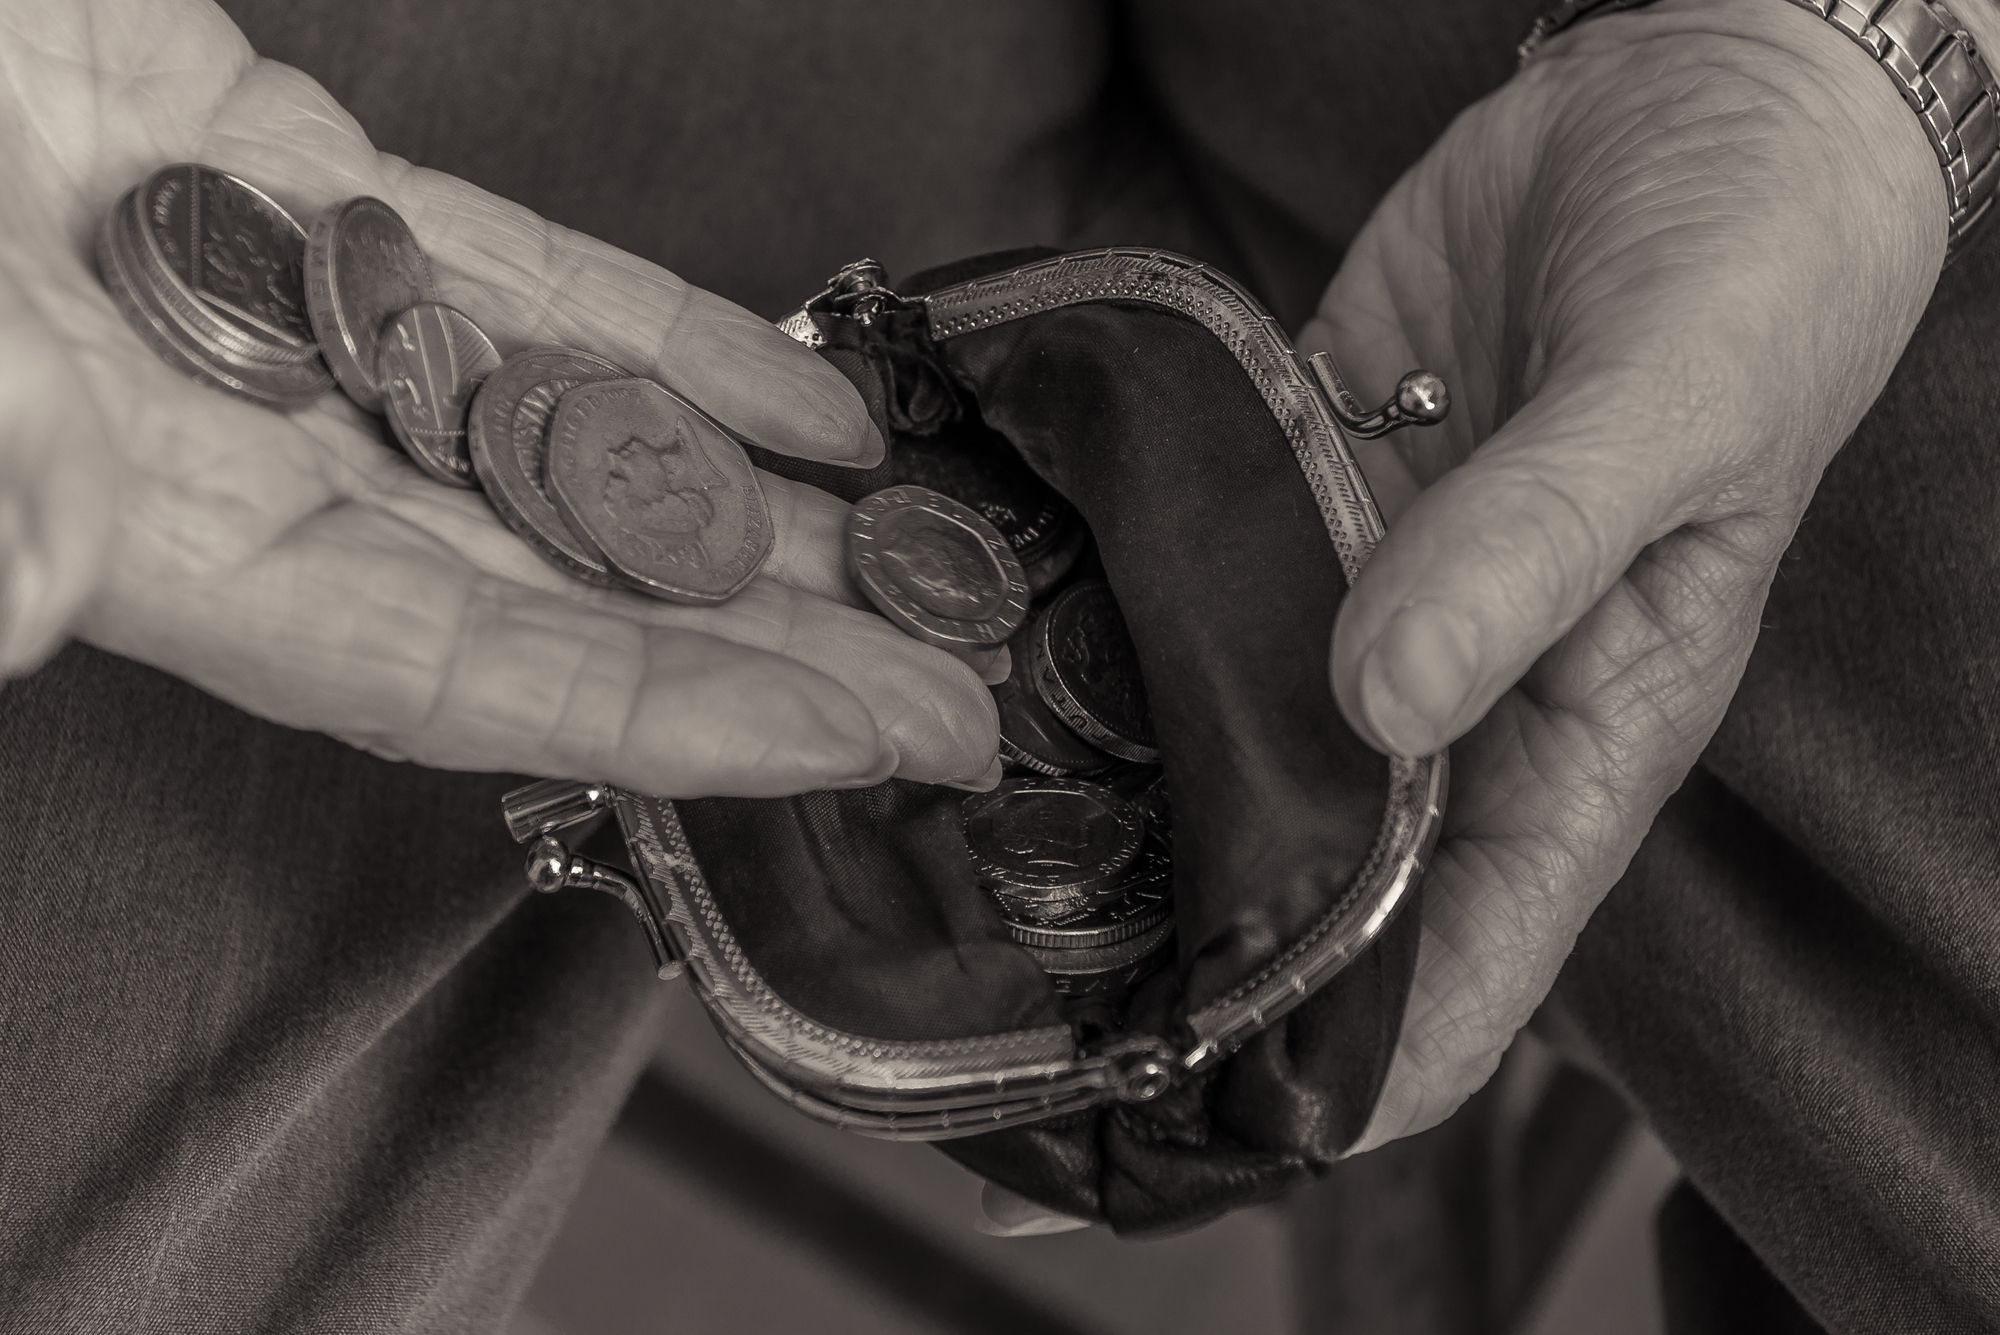 British pensioner putting coins into a purse. Close up of hands. Black and white image. Cost of living concept.